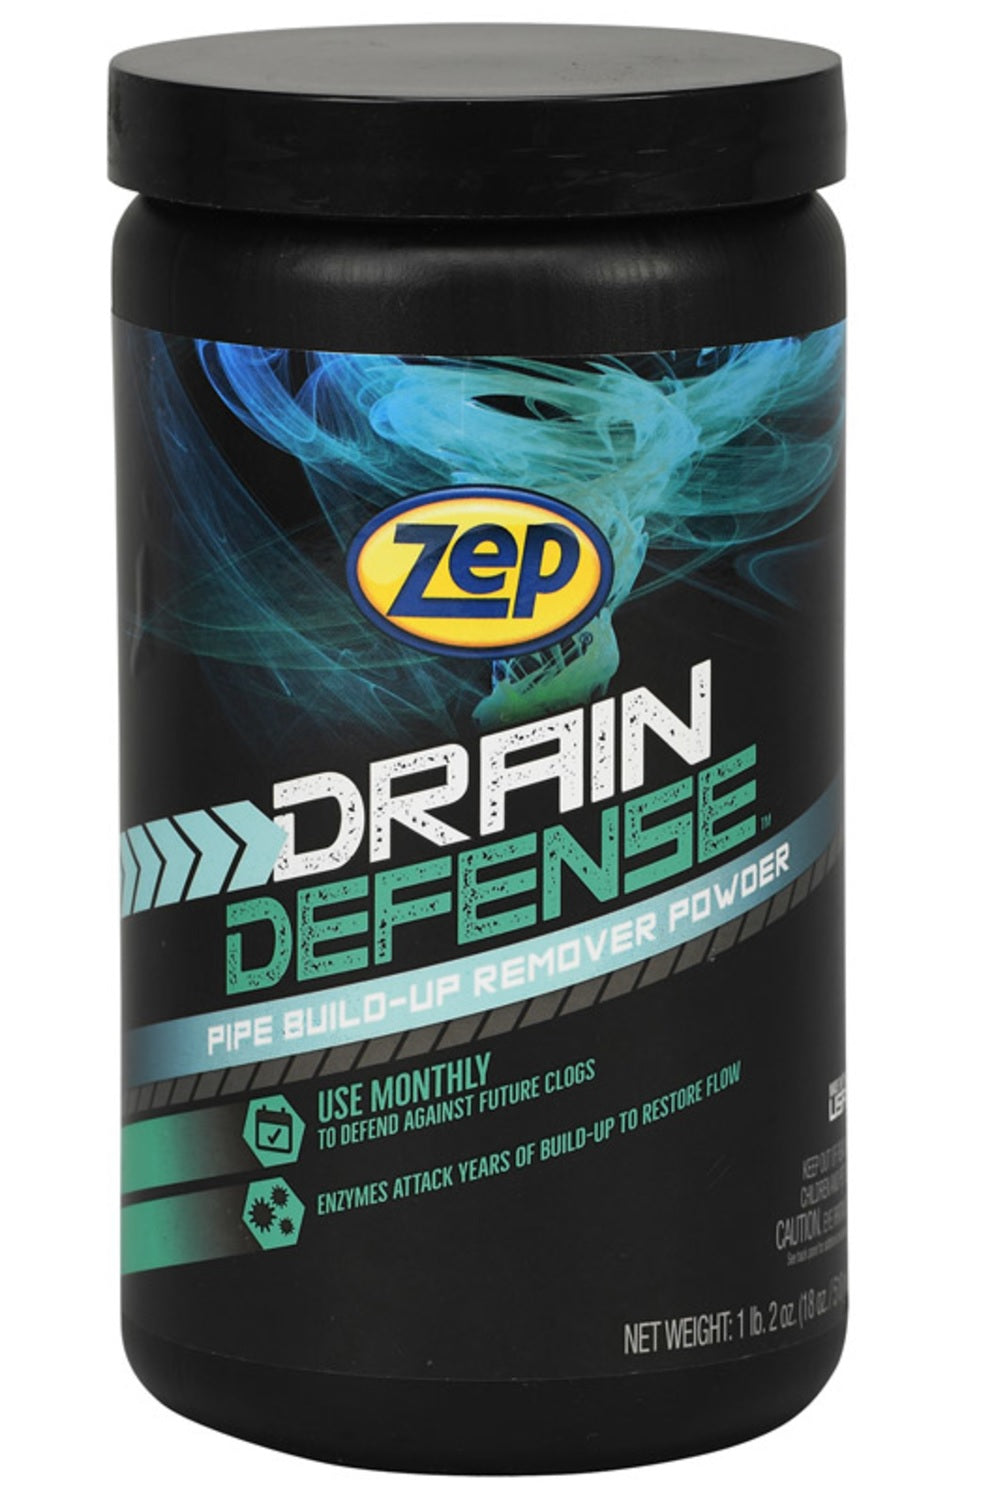 Buy drain care build up remover - Online store for drain openers, bacterical cleaners in USA, on sale, low price, discount deals, coupon code